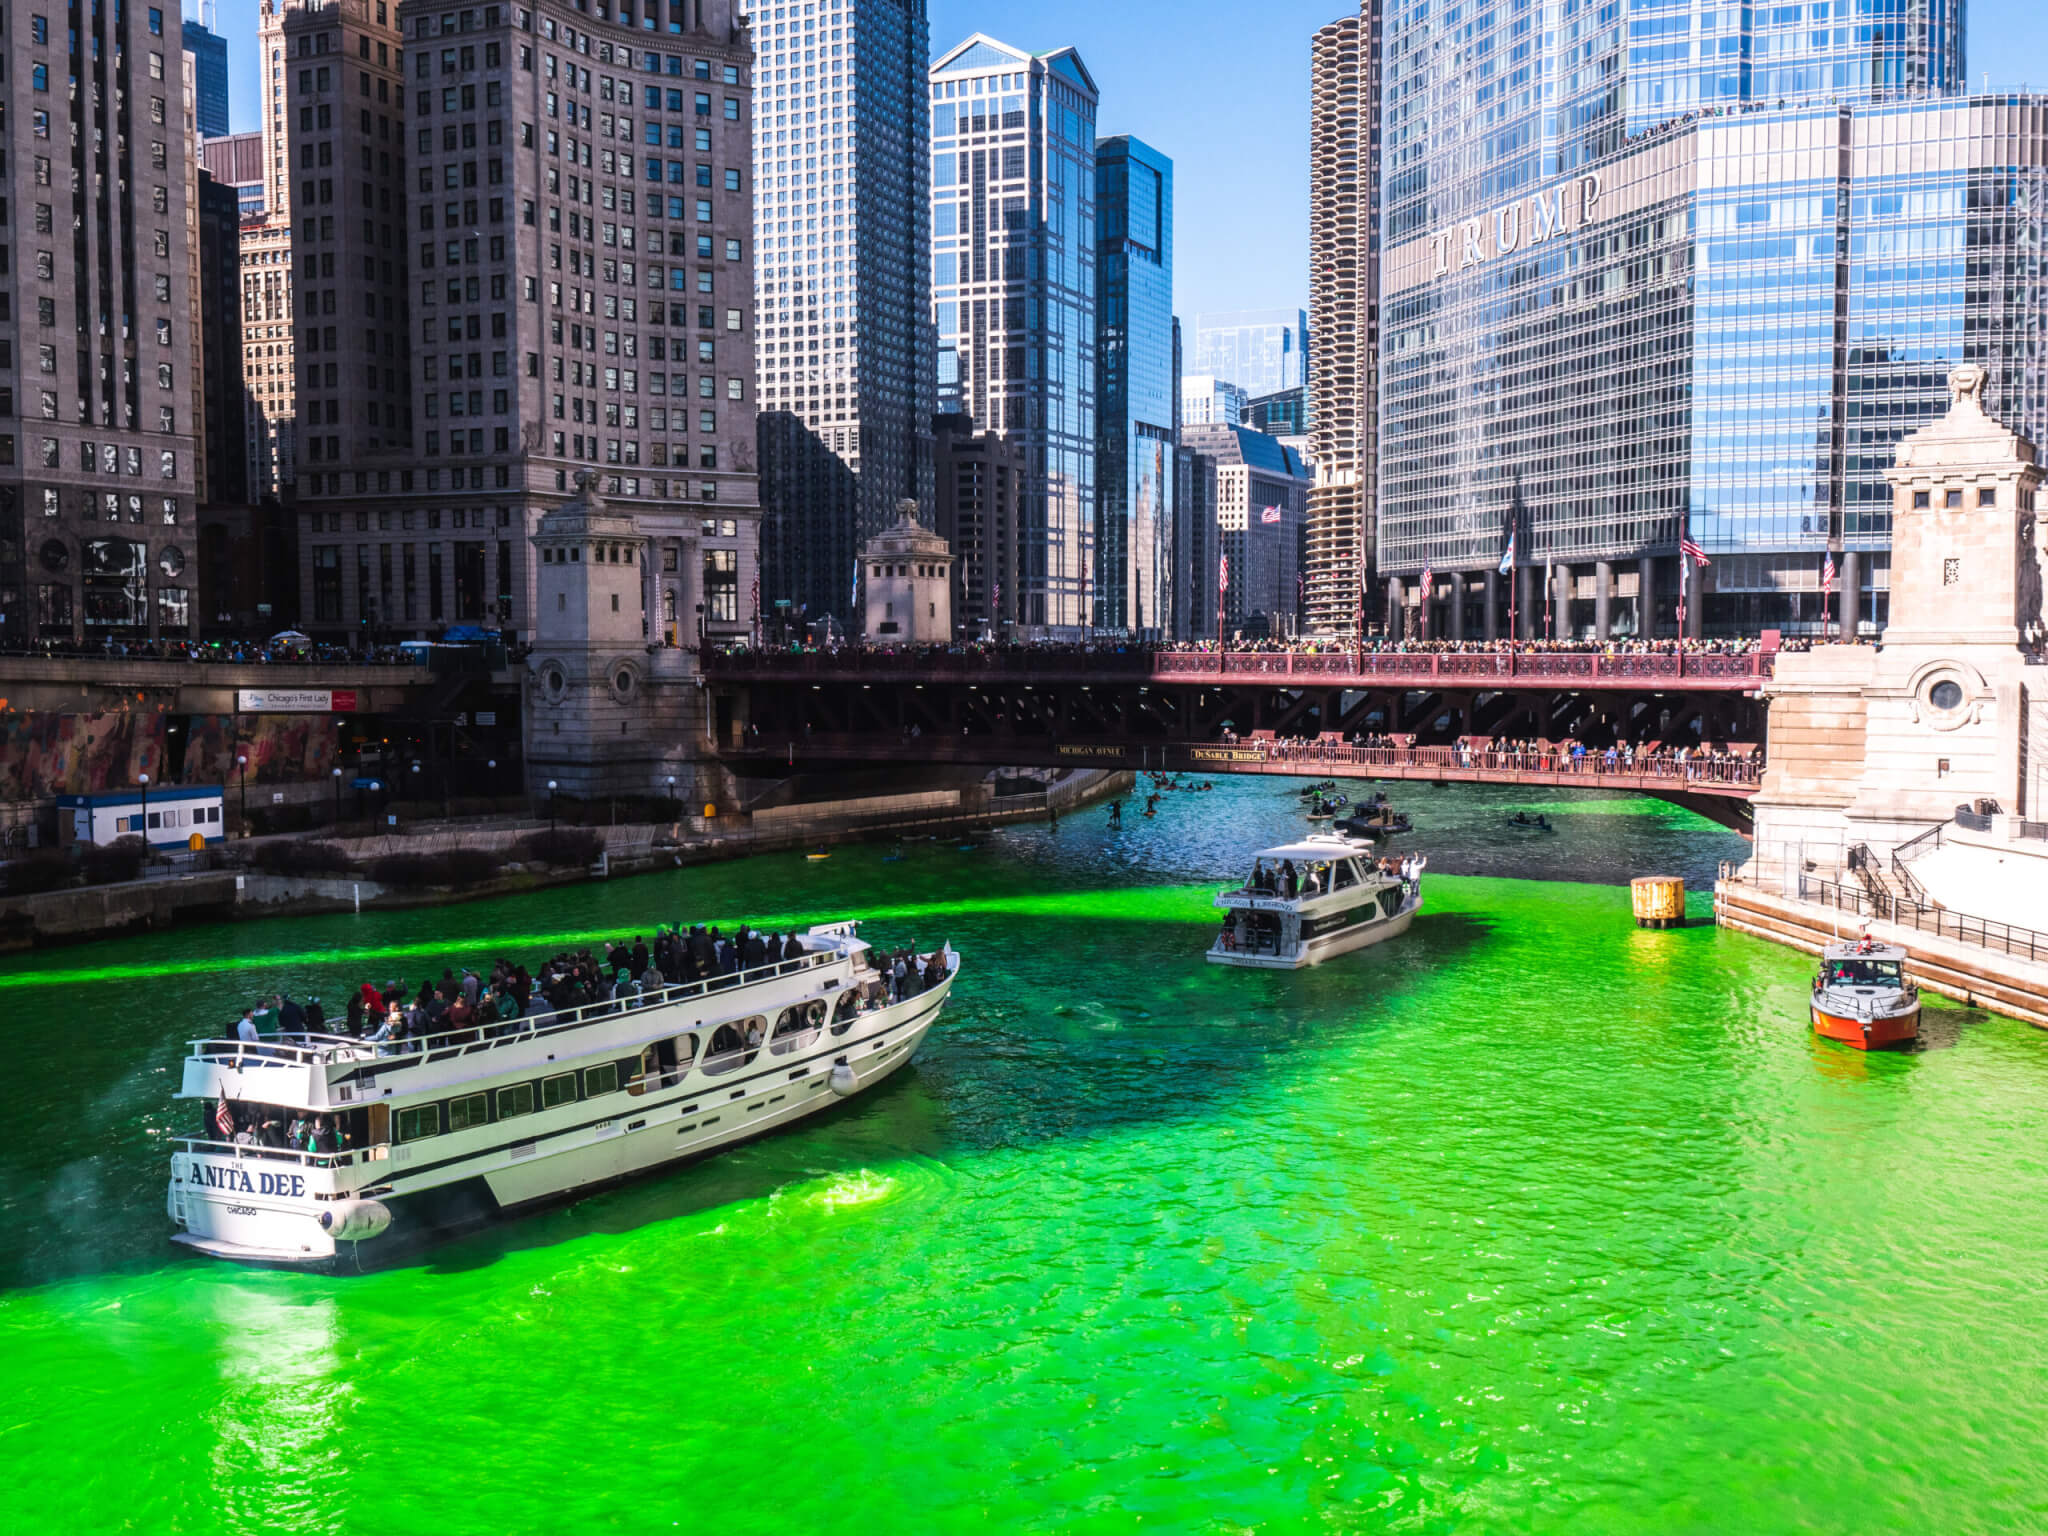 The Chicago River is dyed green in Chicago for St. Patrick's Day